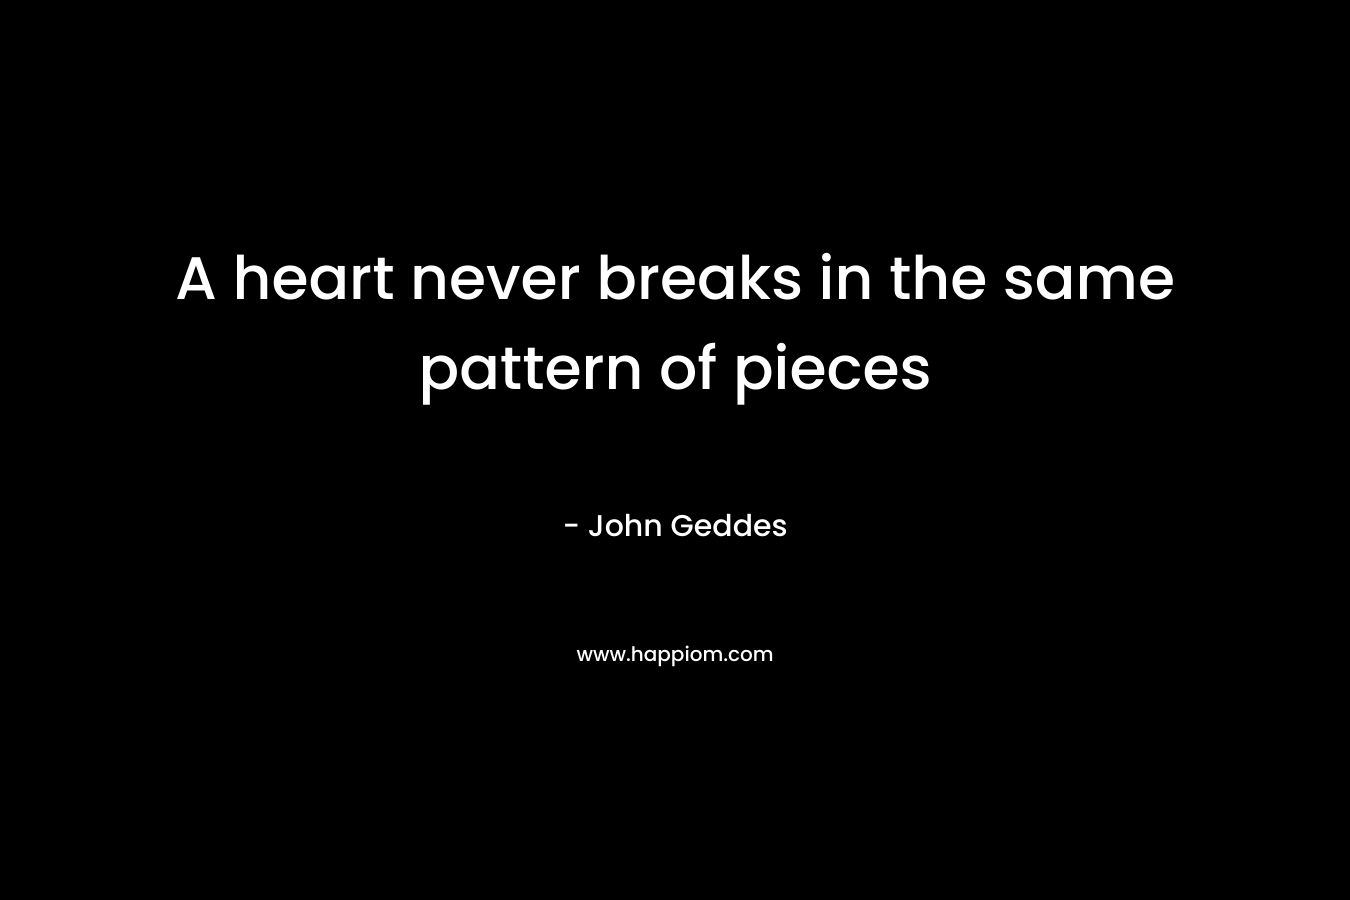 A heart never breaks in the same pattern of pieces